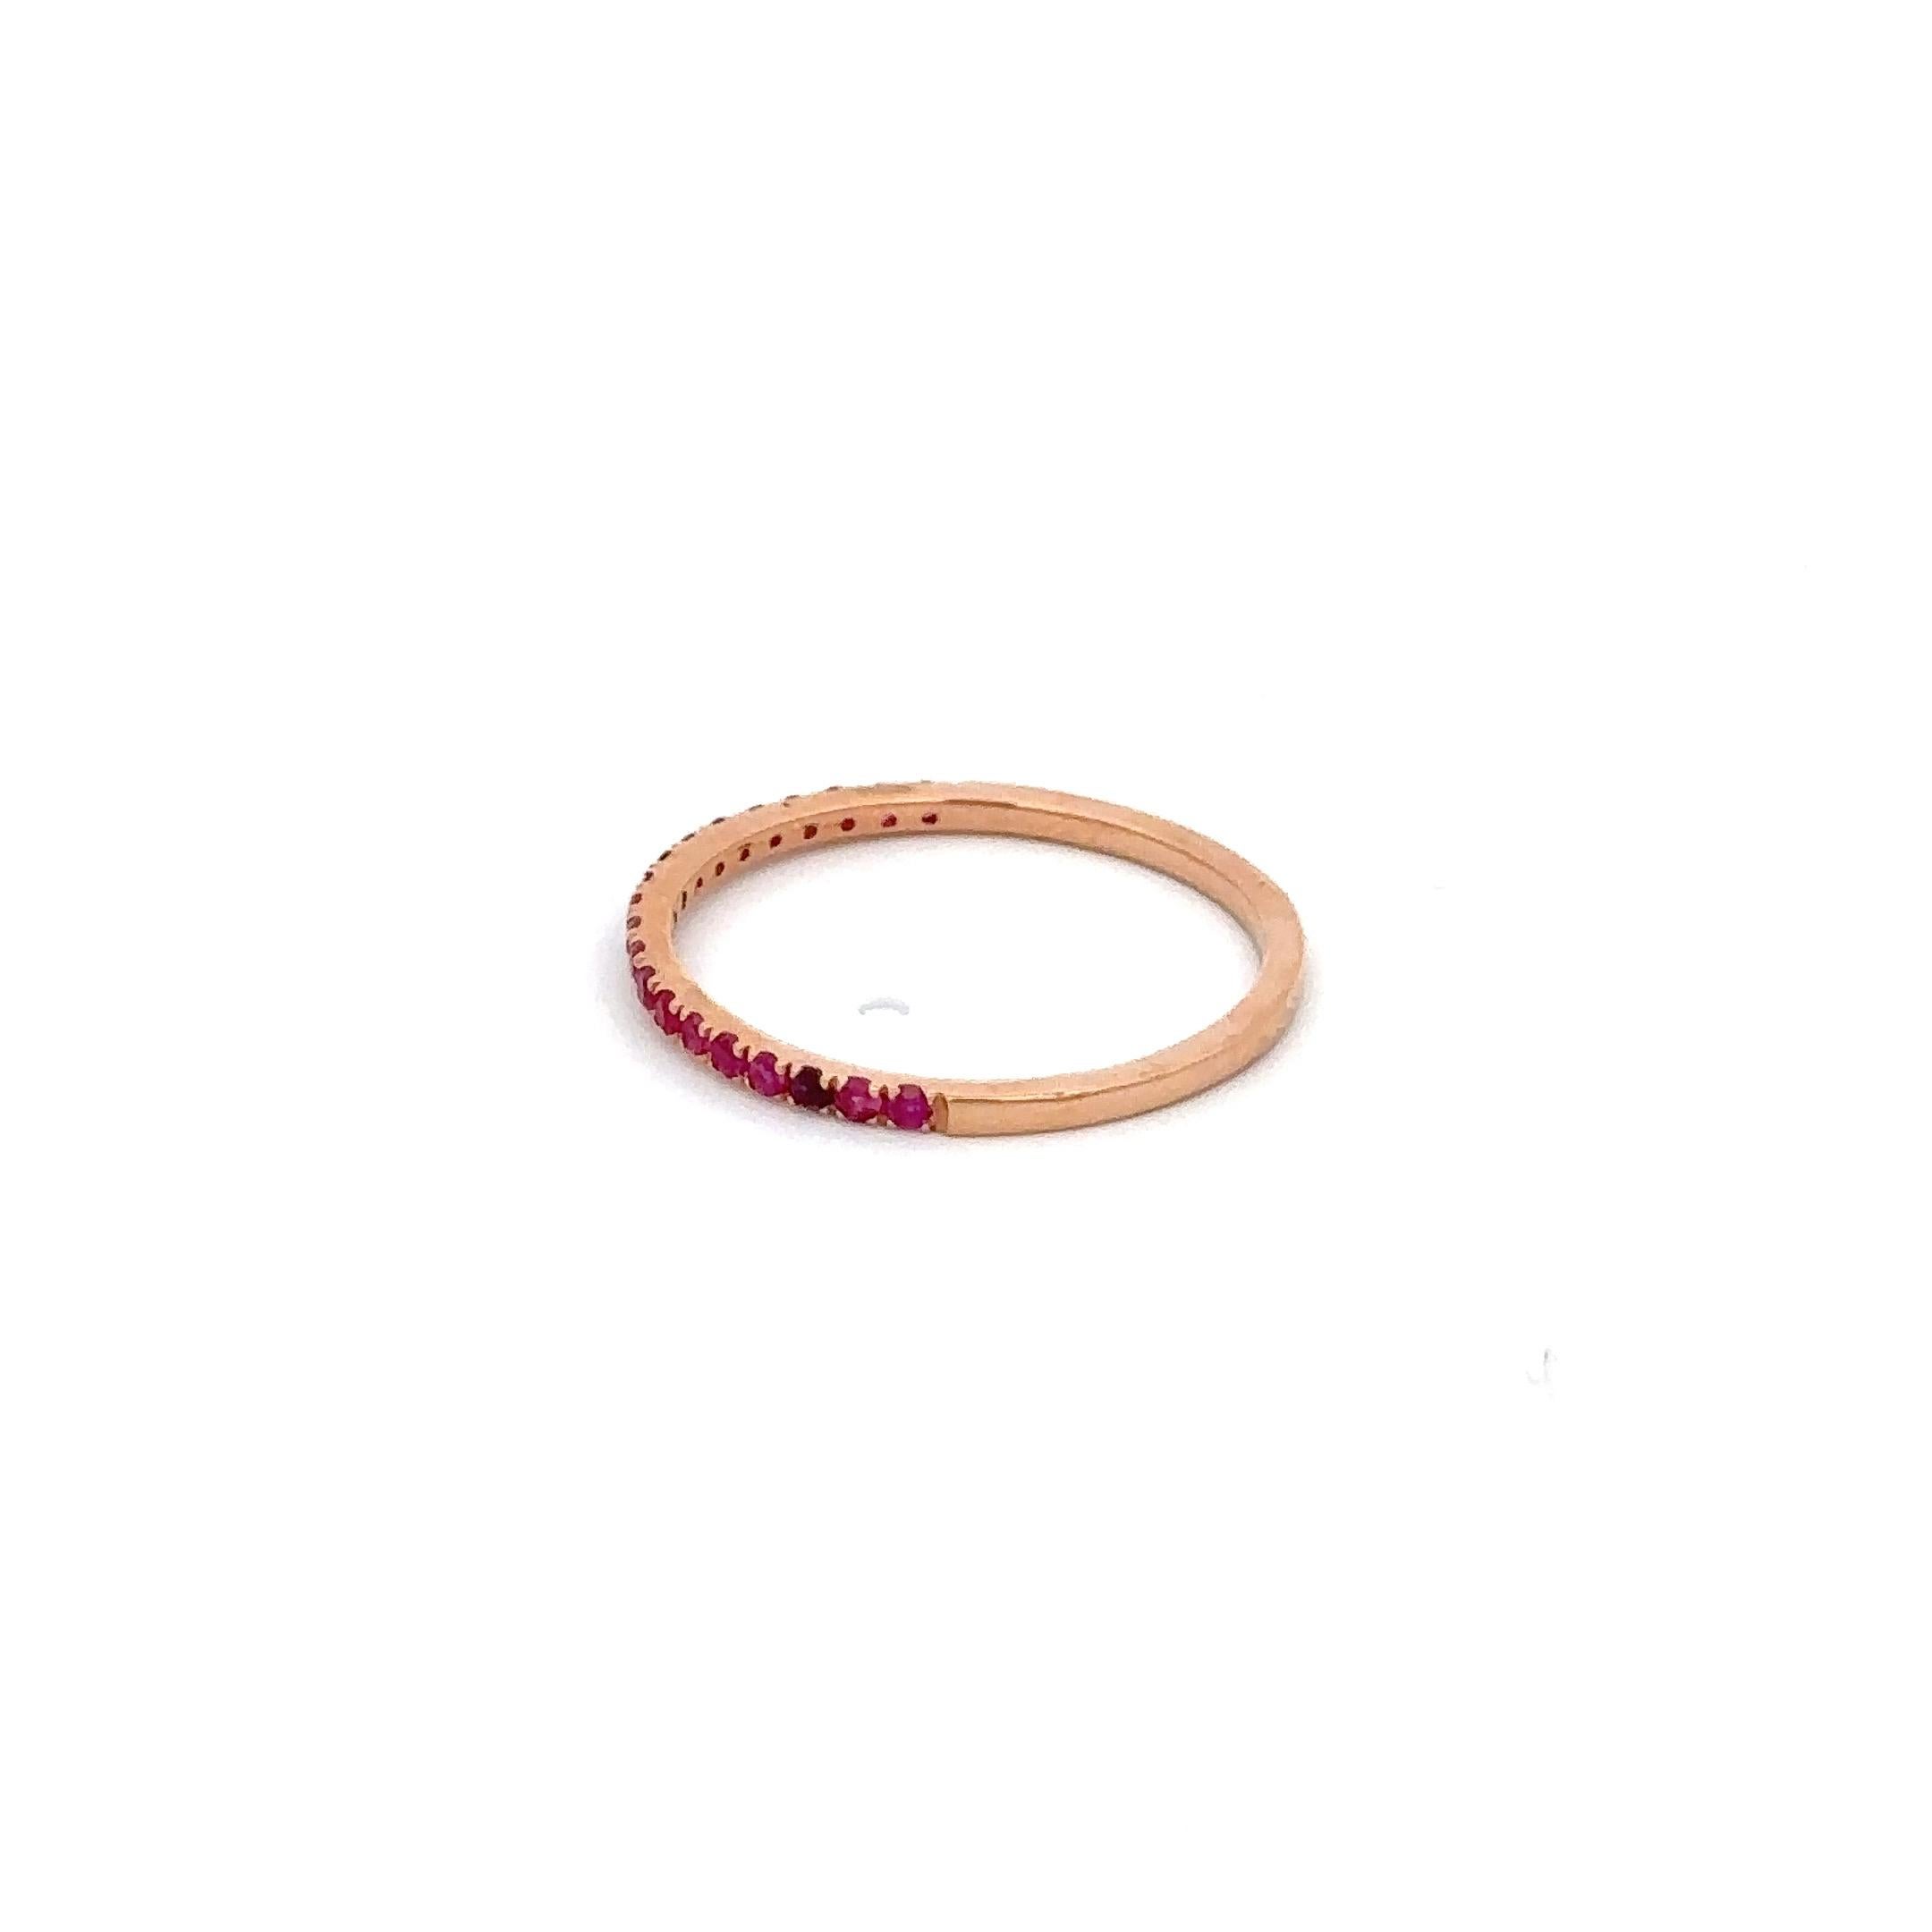 For Sale:  Handcrafted Pave Set Ruby Stacking Band Ring in 18k Solid Rose Gold 3